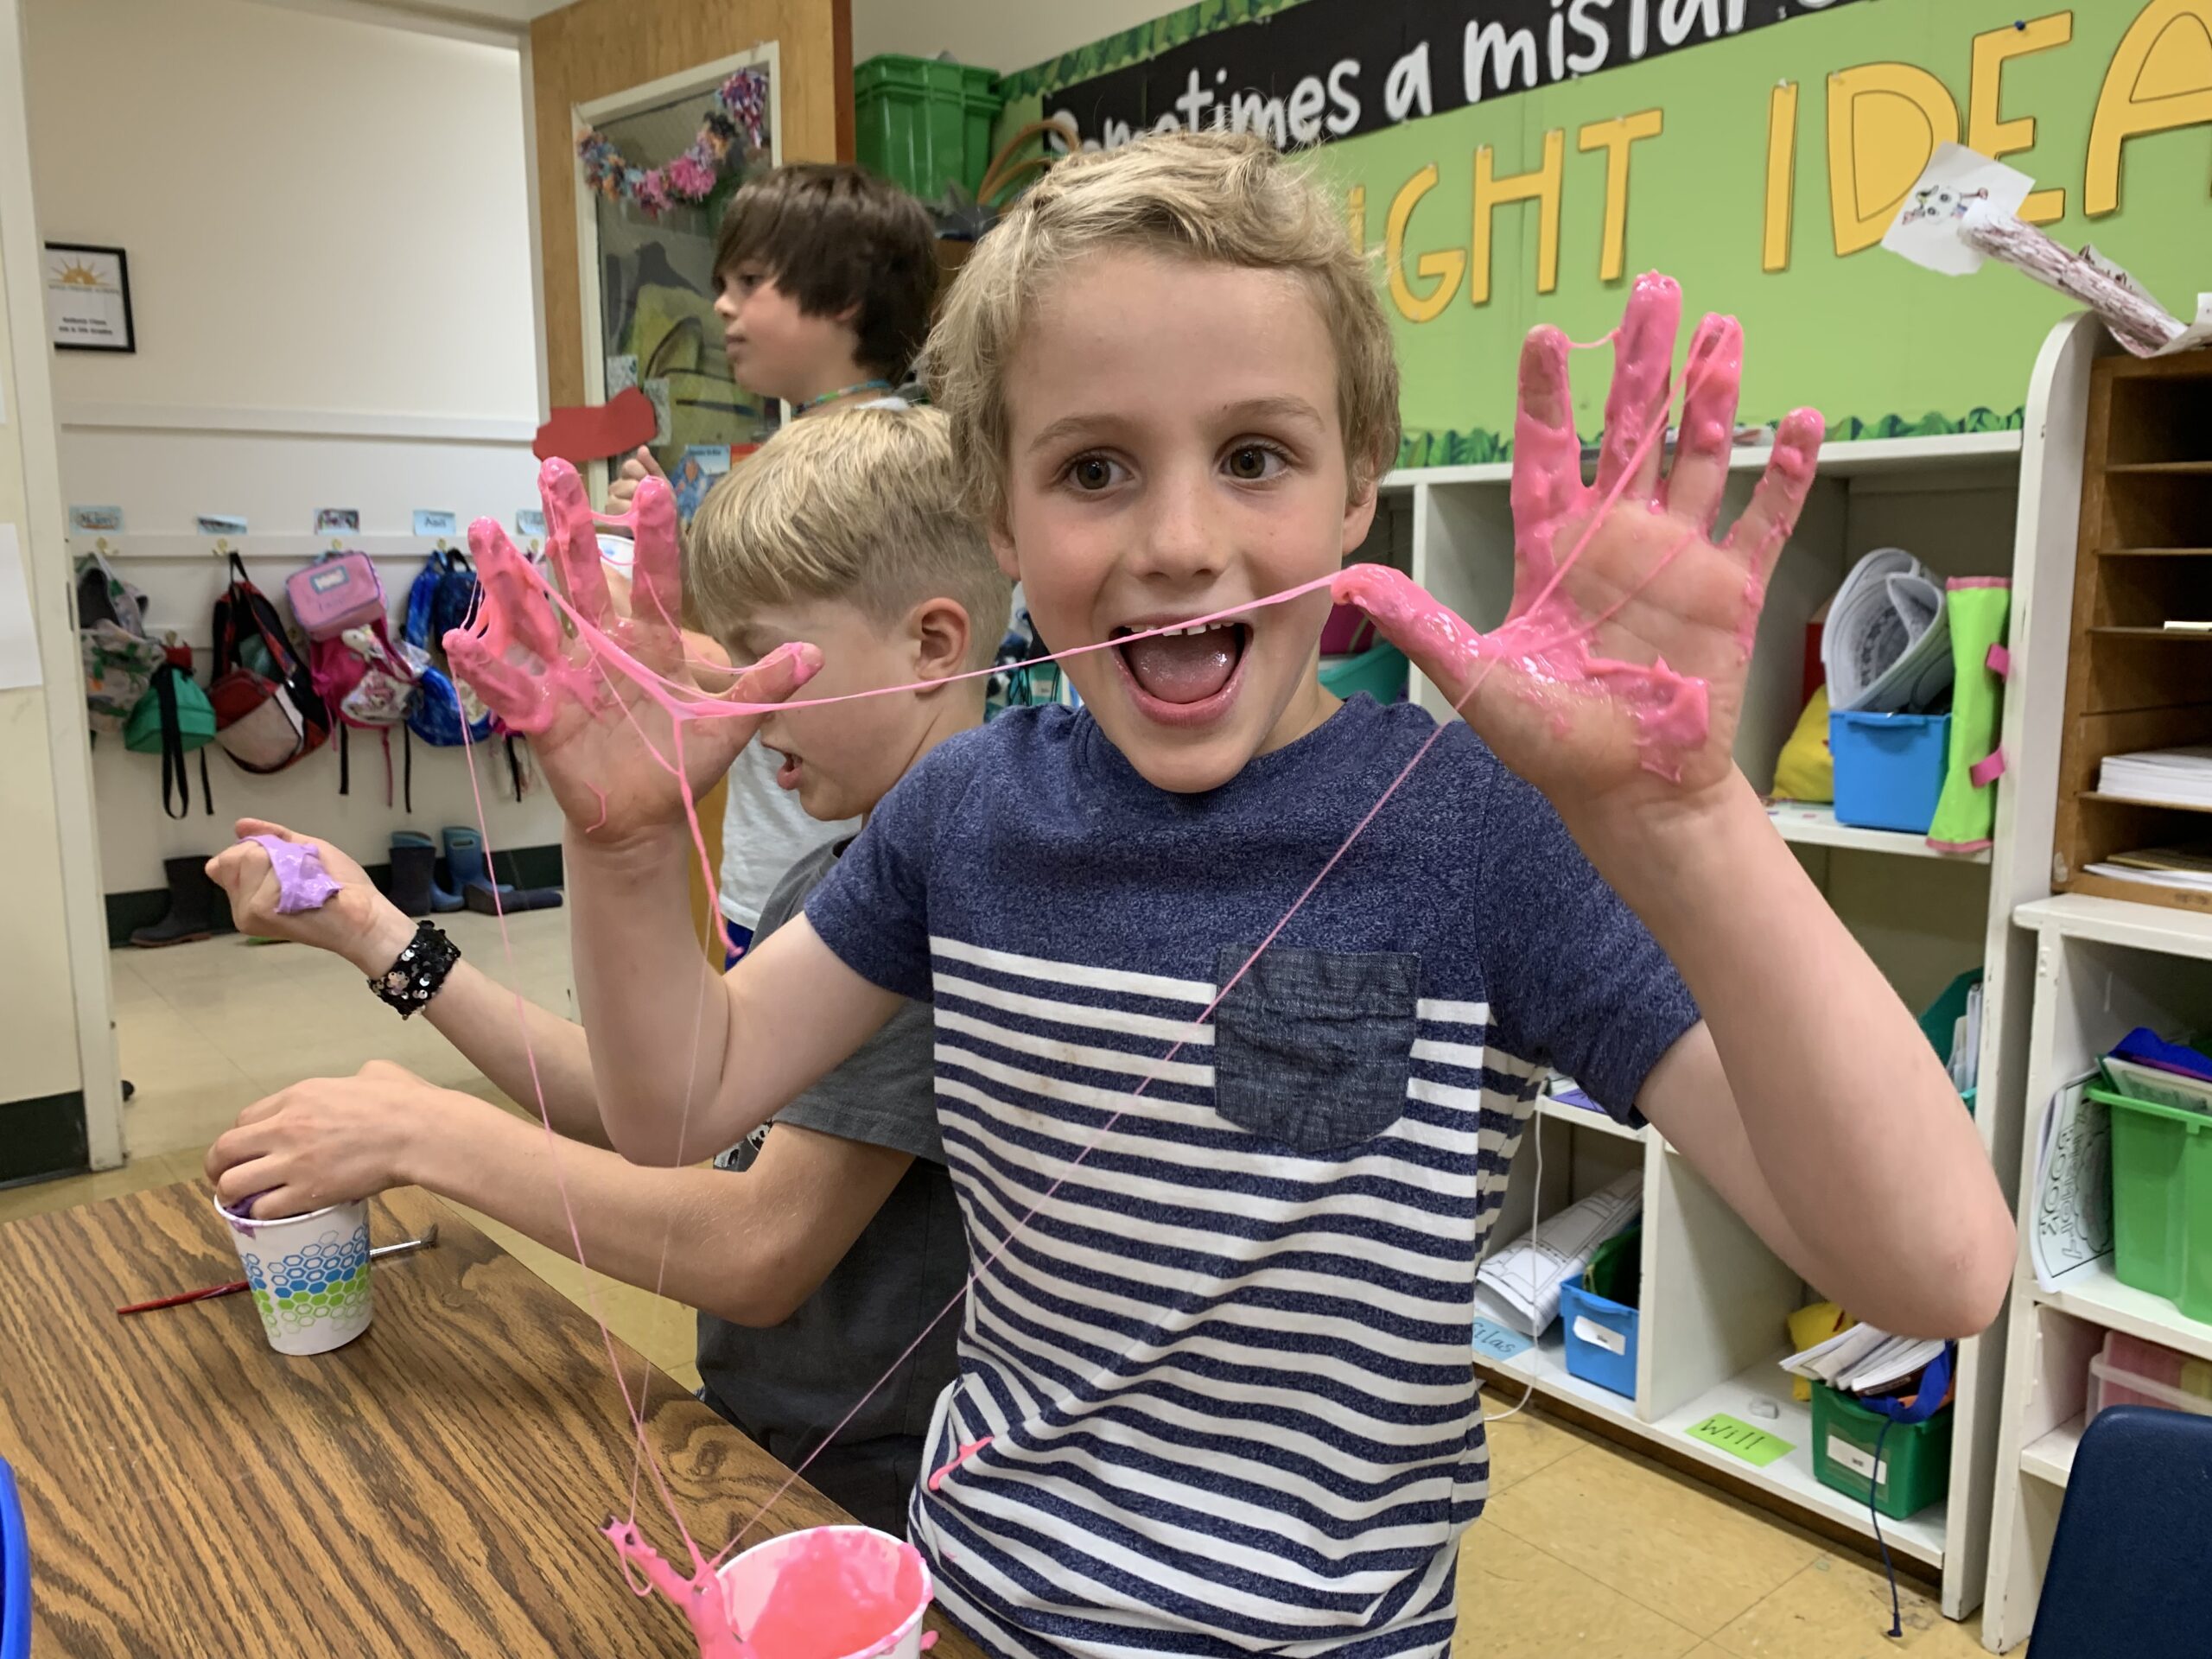 Student shows off Slimy hands